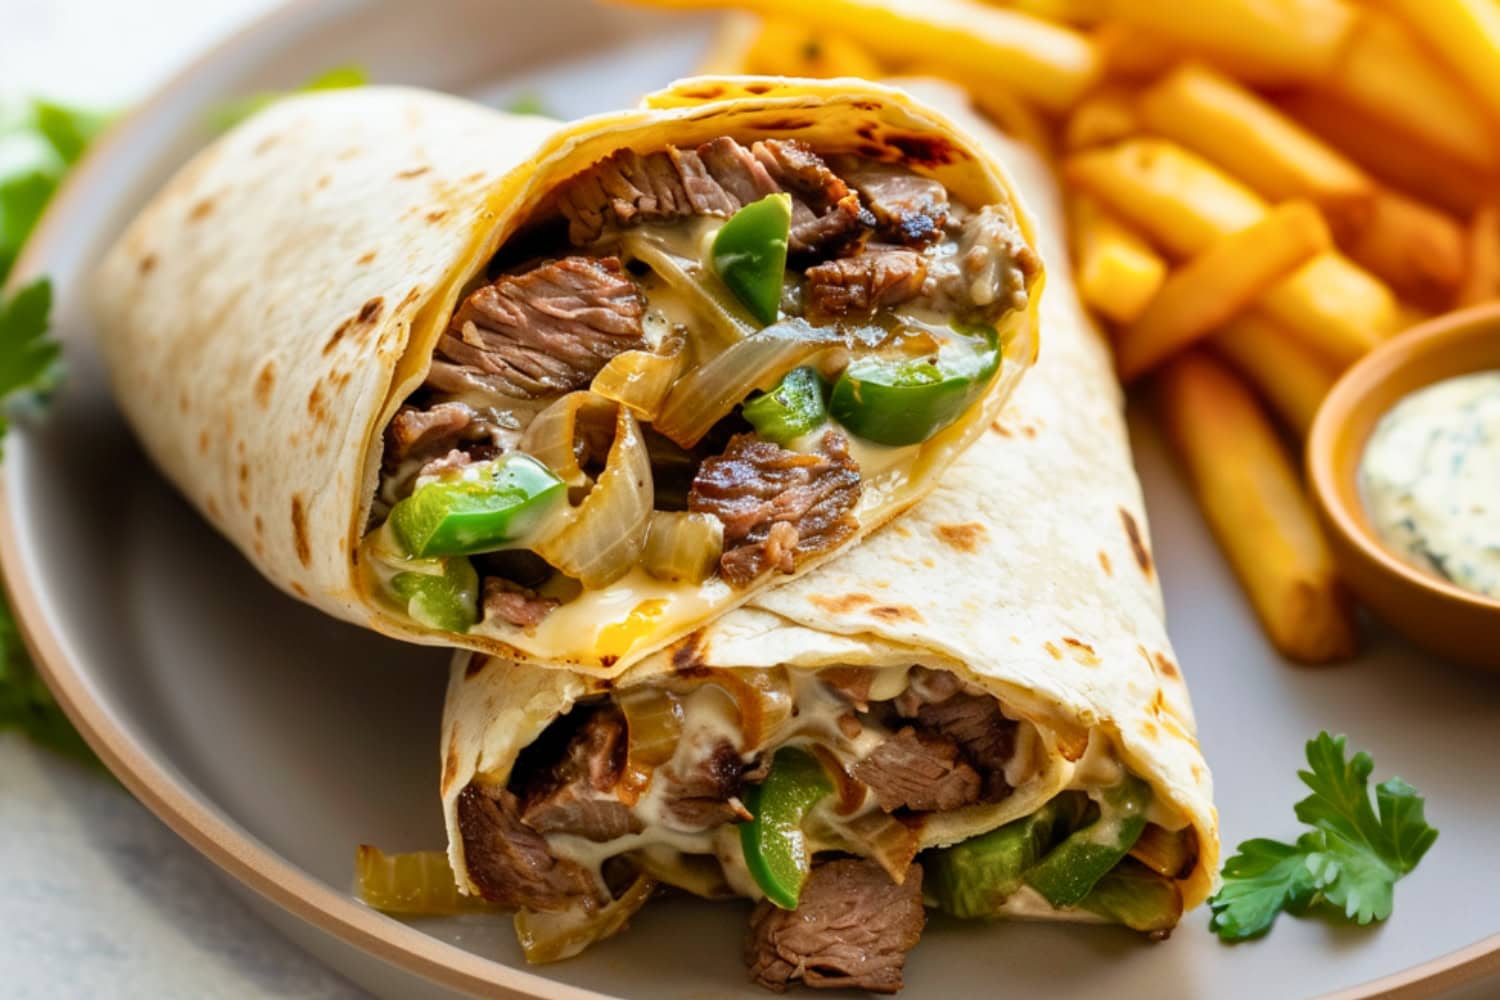 Philly cheesesteak wrap on a plate with dipping sauce and fries on the side.